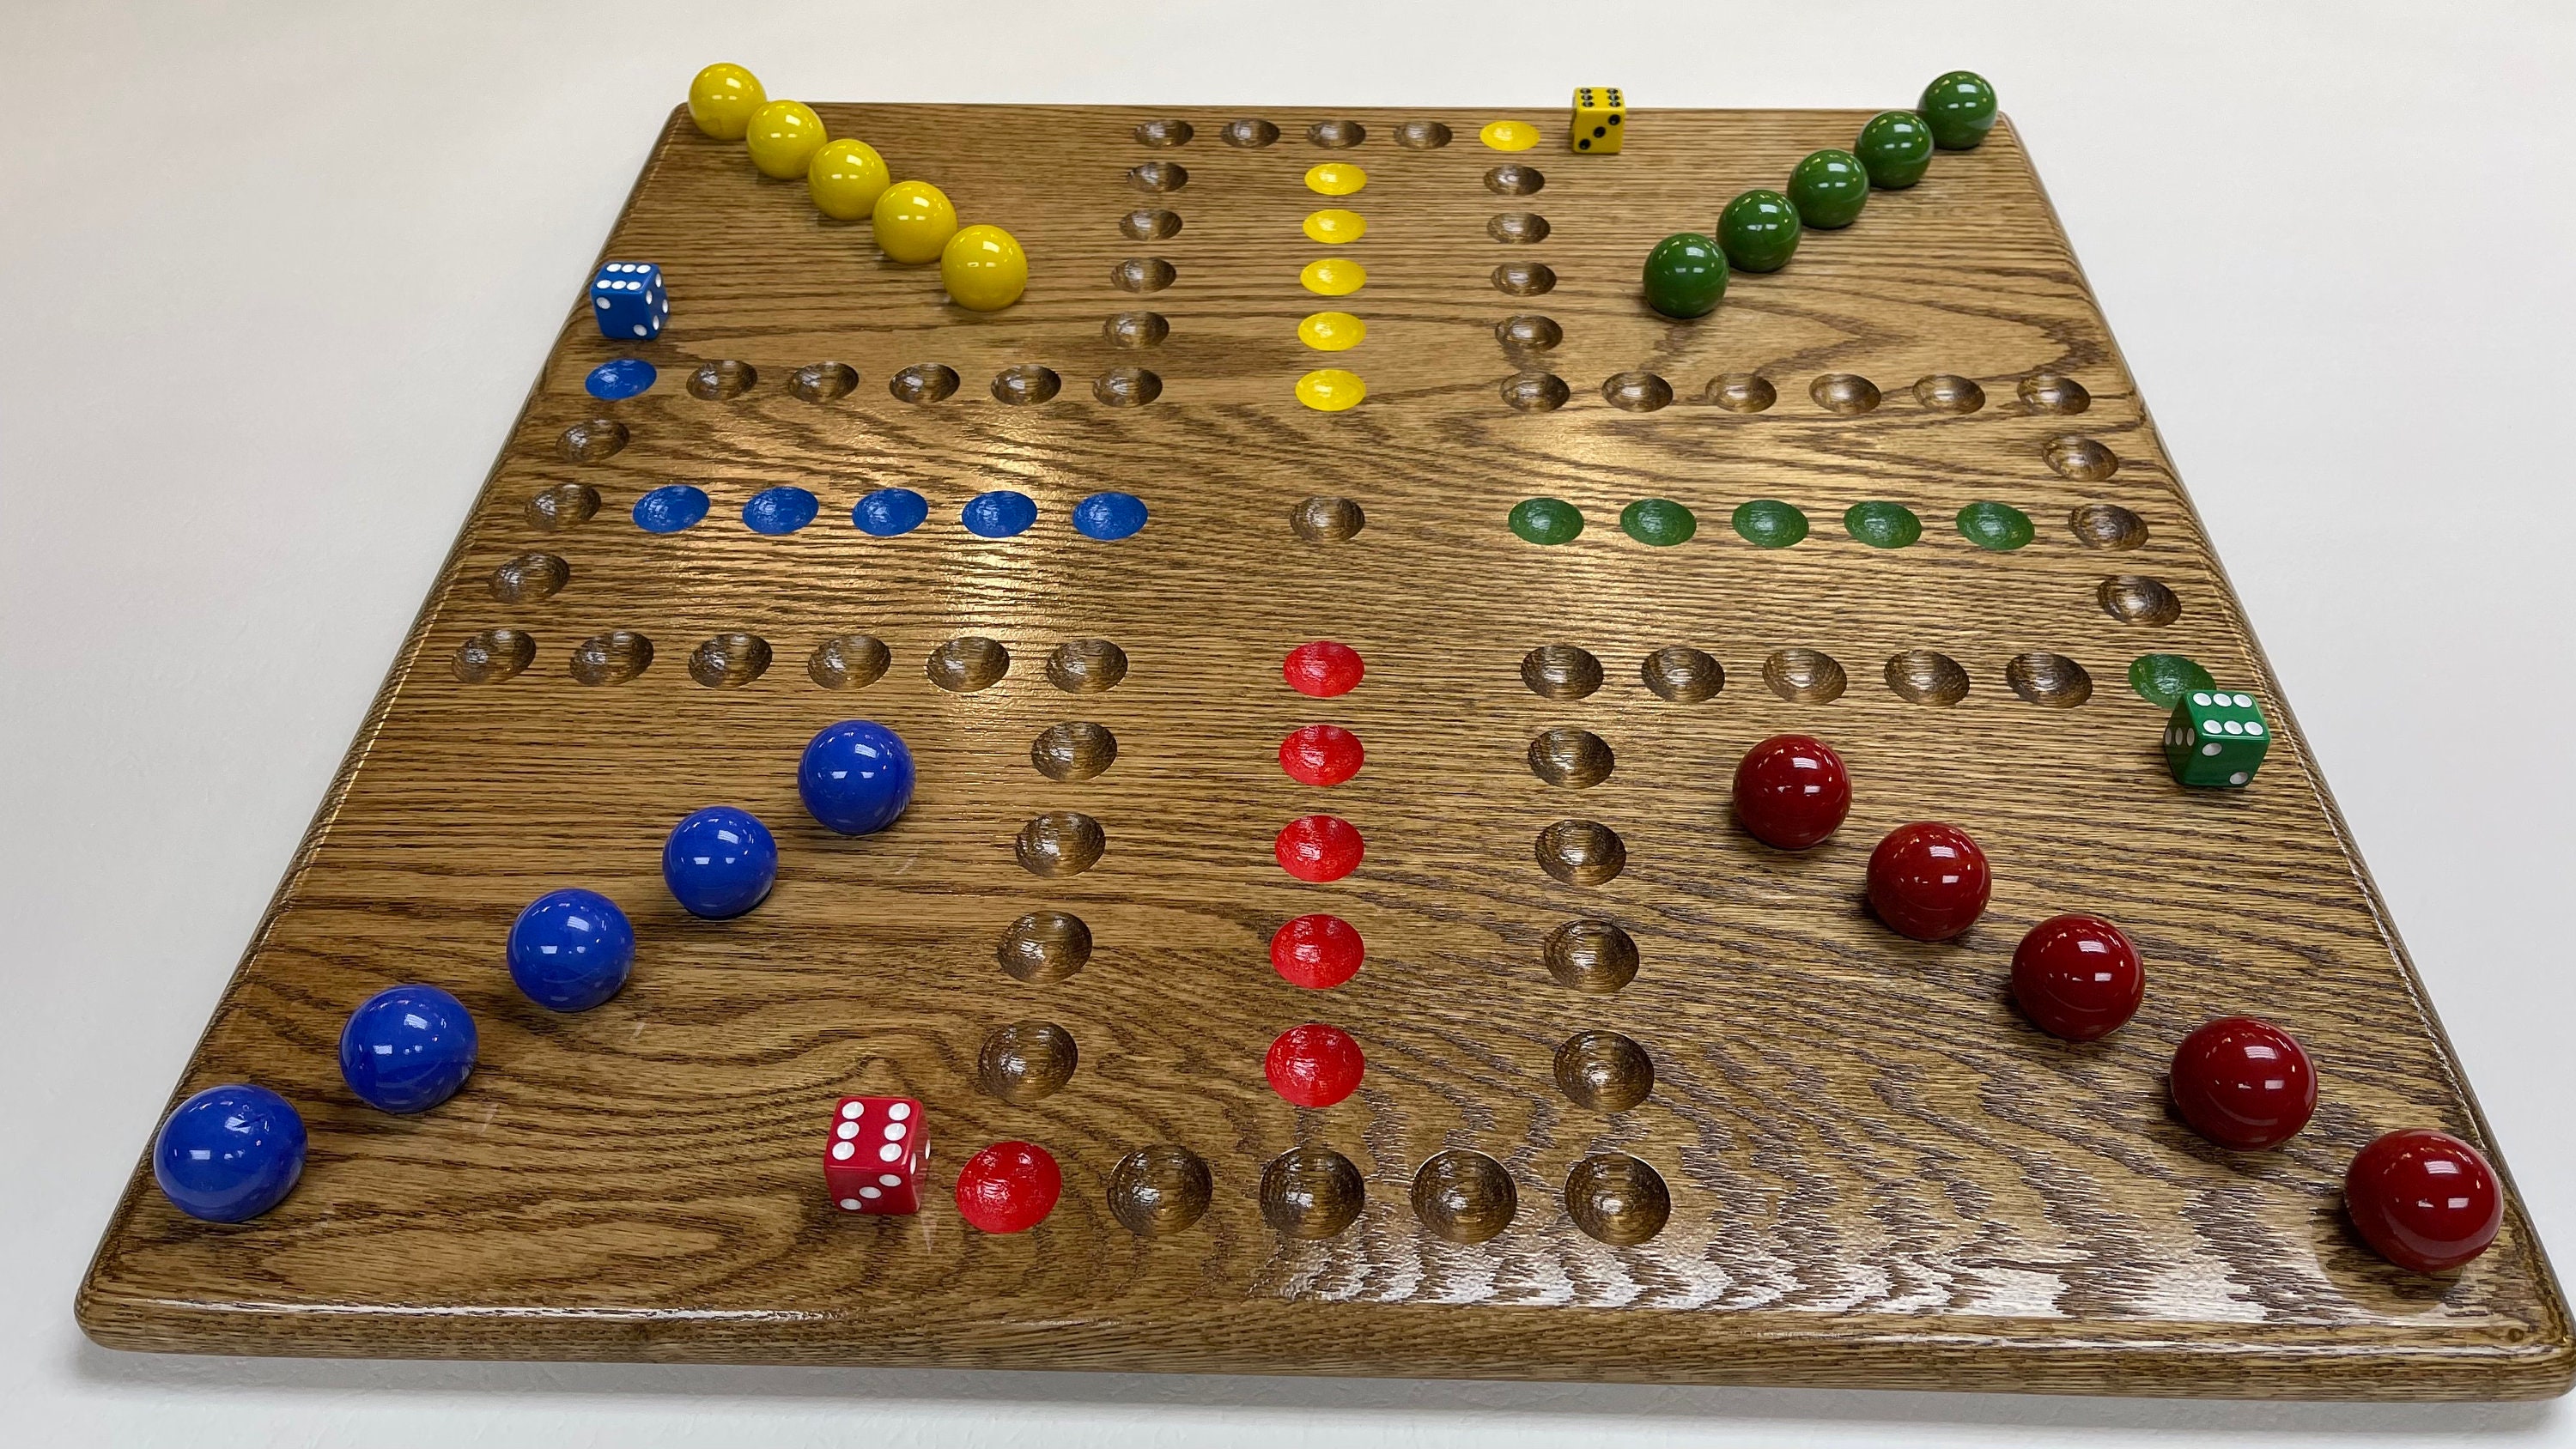 MSN Games - Wahoo: The Marble Board-Game